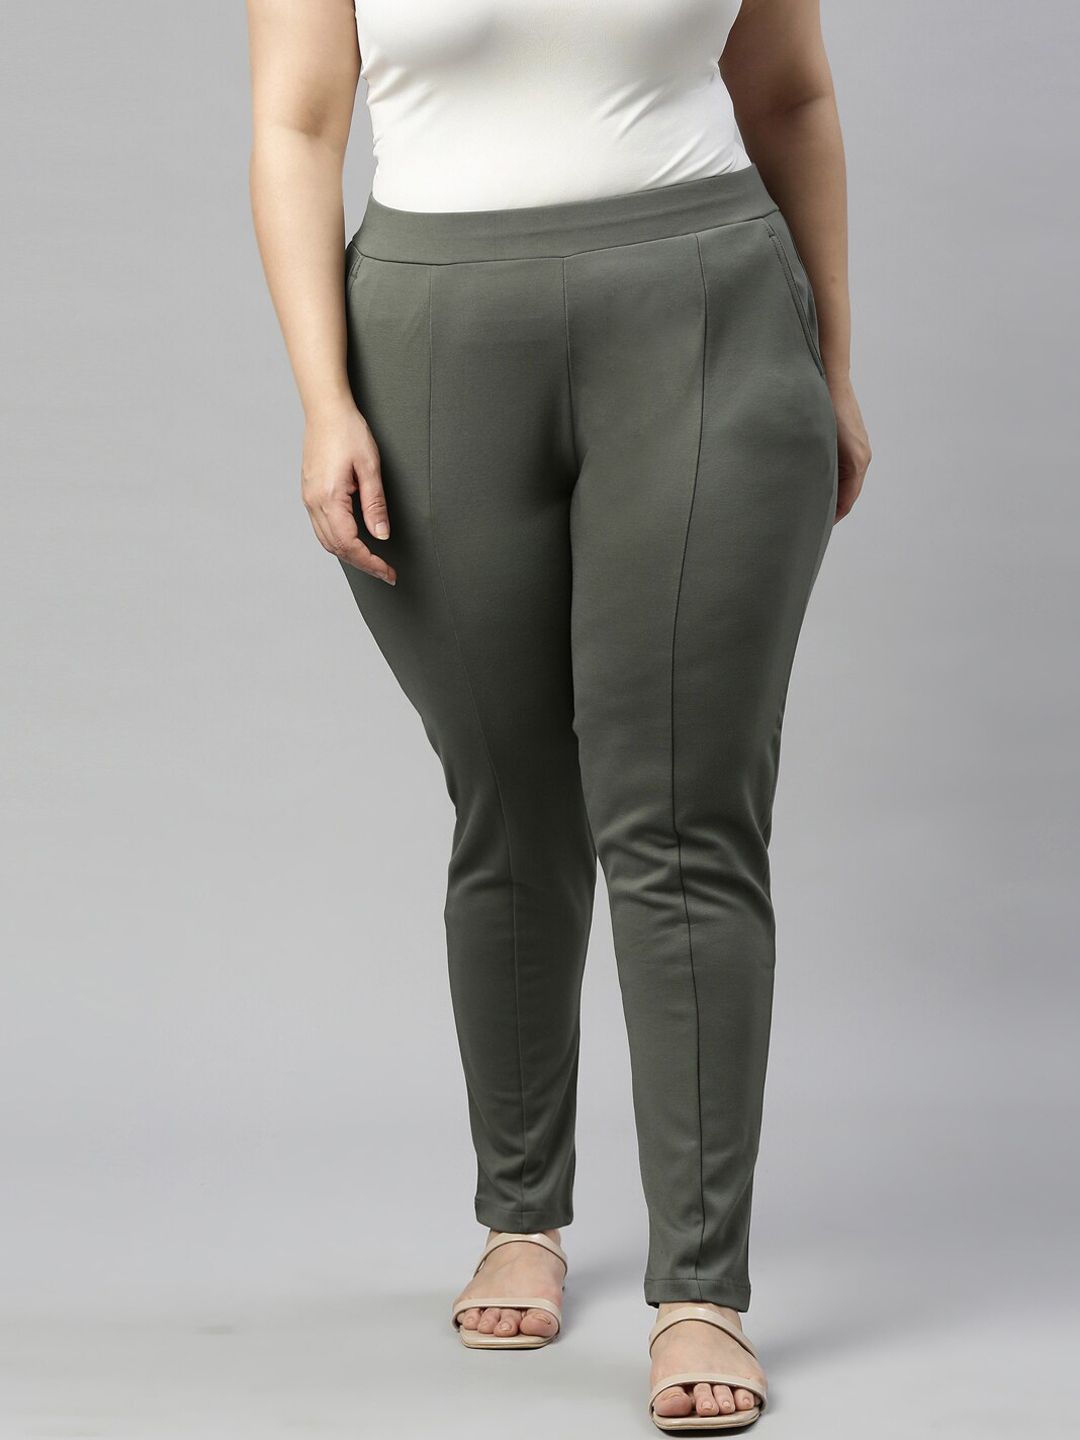 Go Colors Women Olive Green Slim Fit Chinos Trousers Price in India